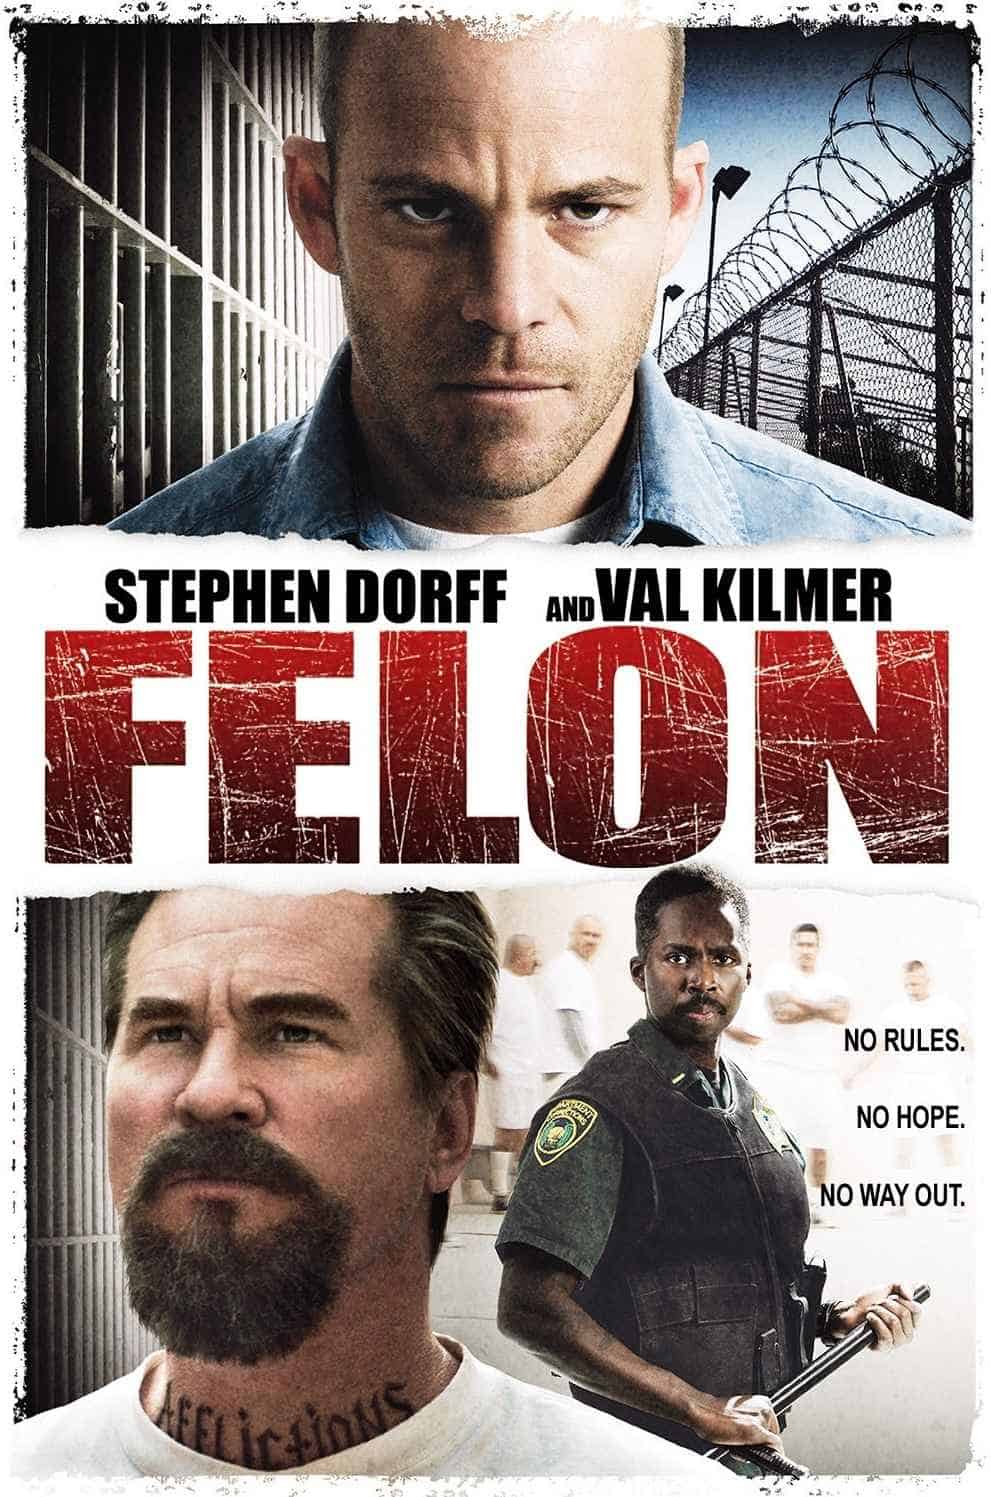 Best Prison Movies You Can't Miss Felon (2008)